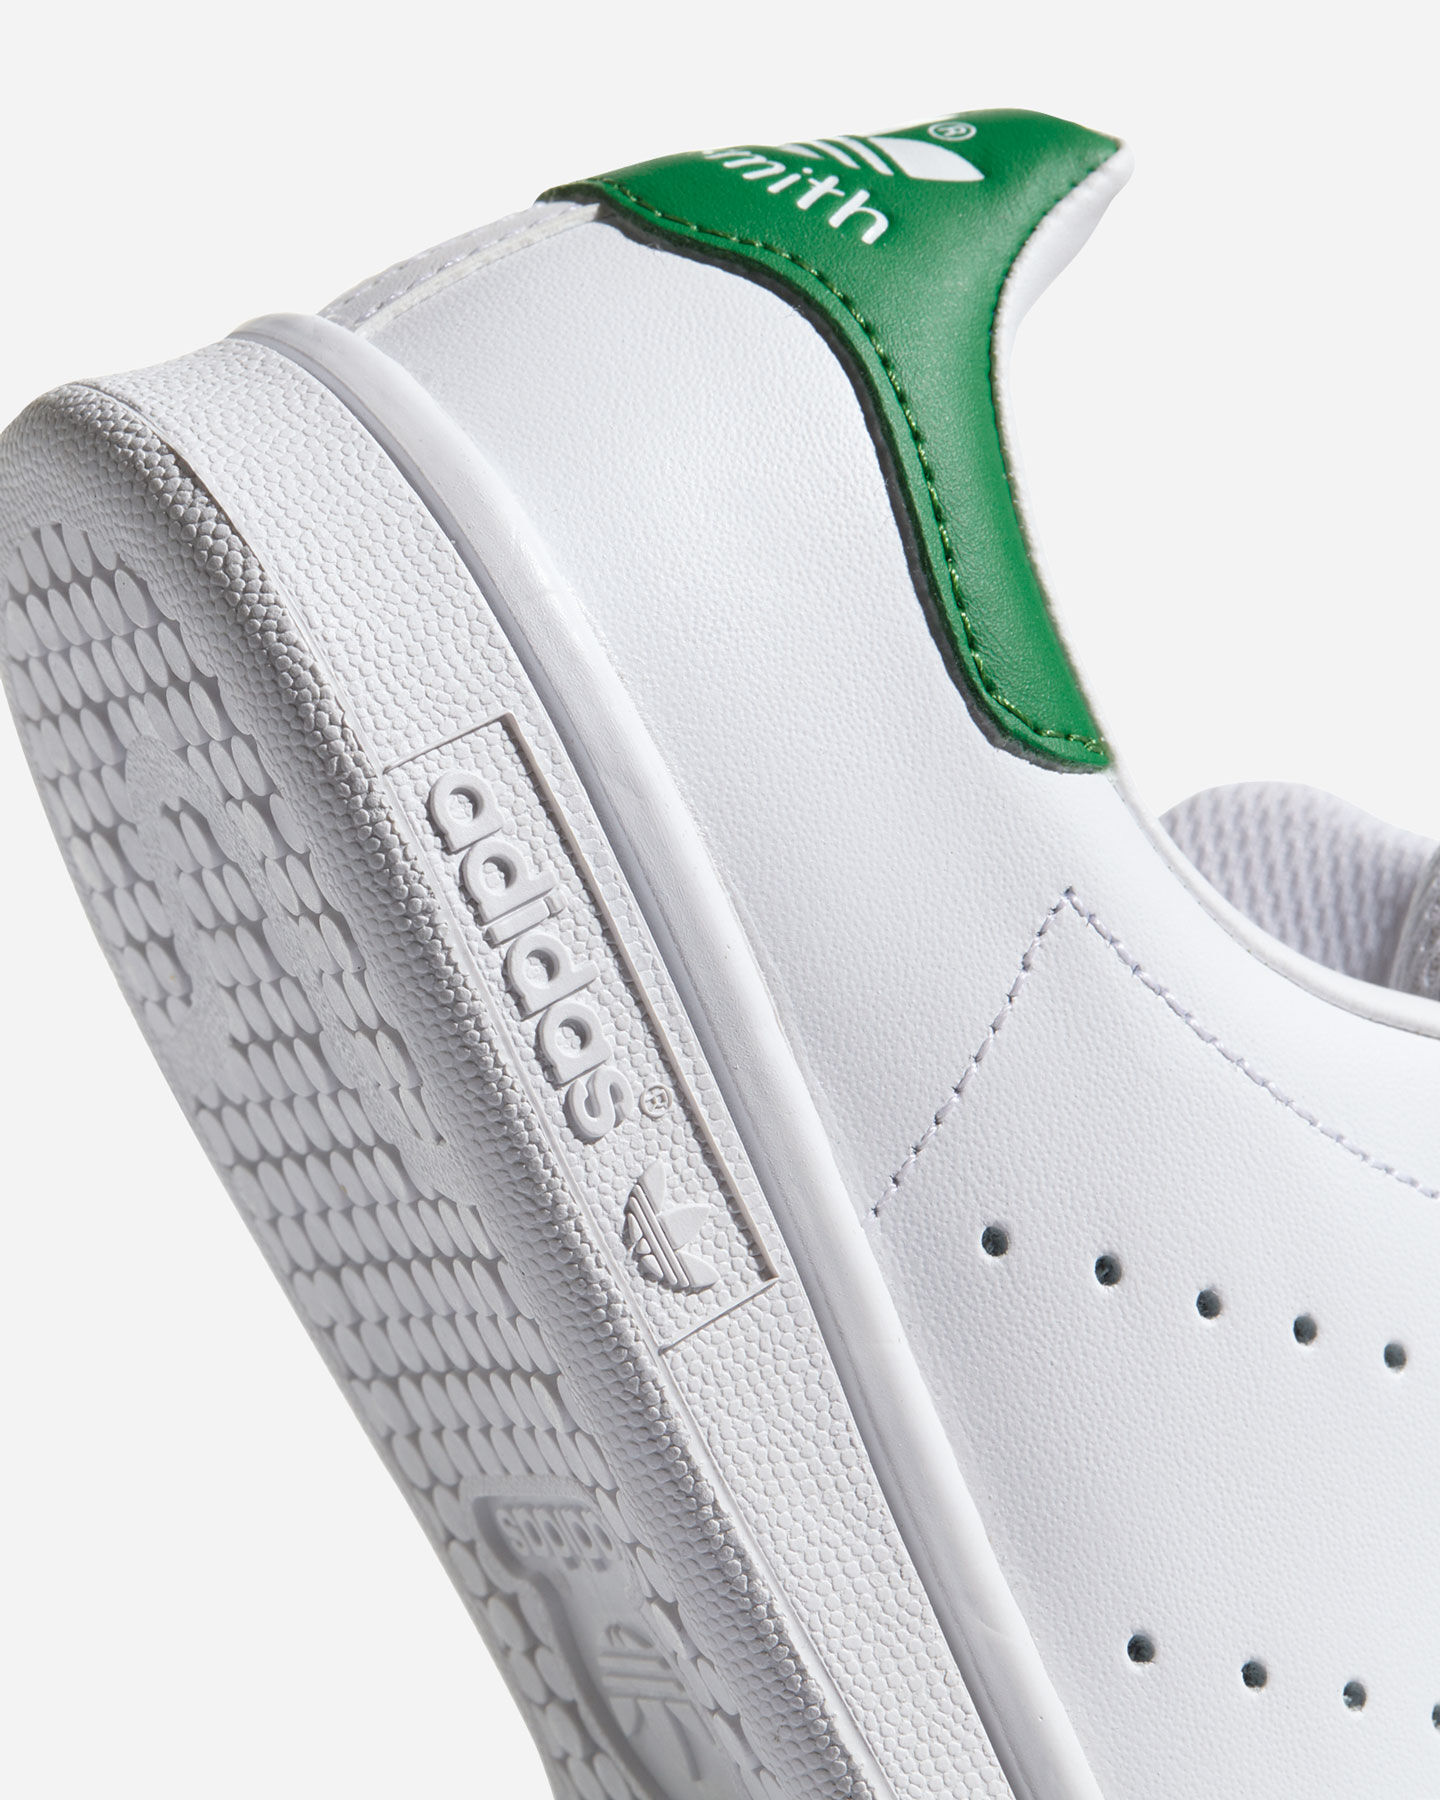 adidas stan smith materiale